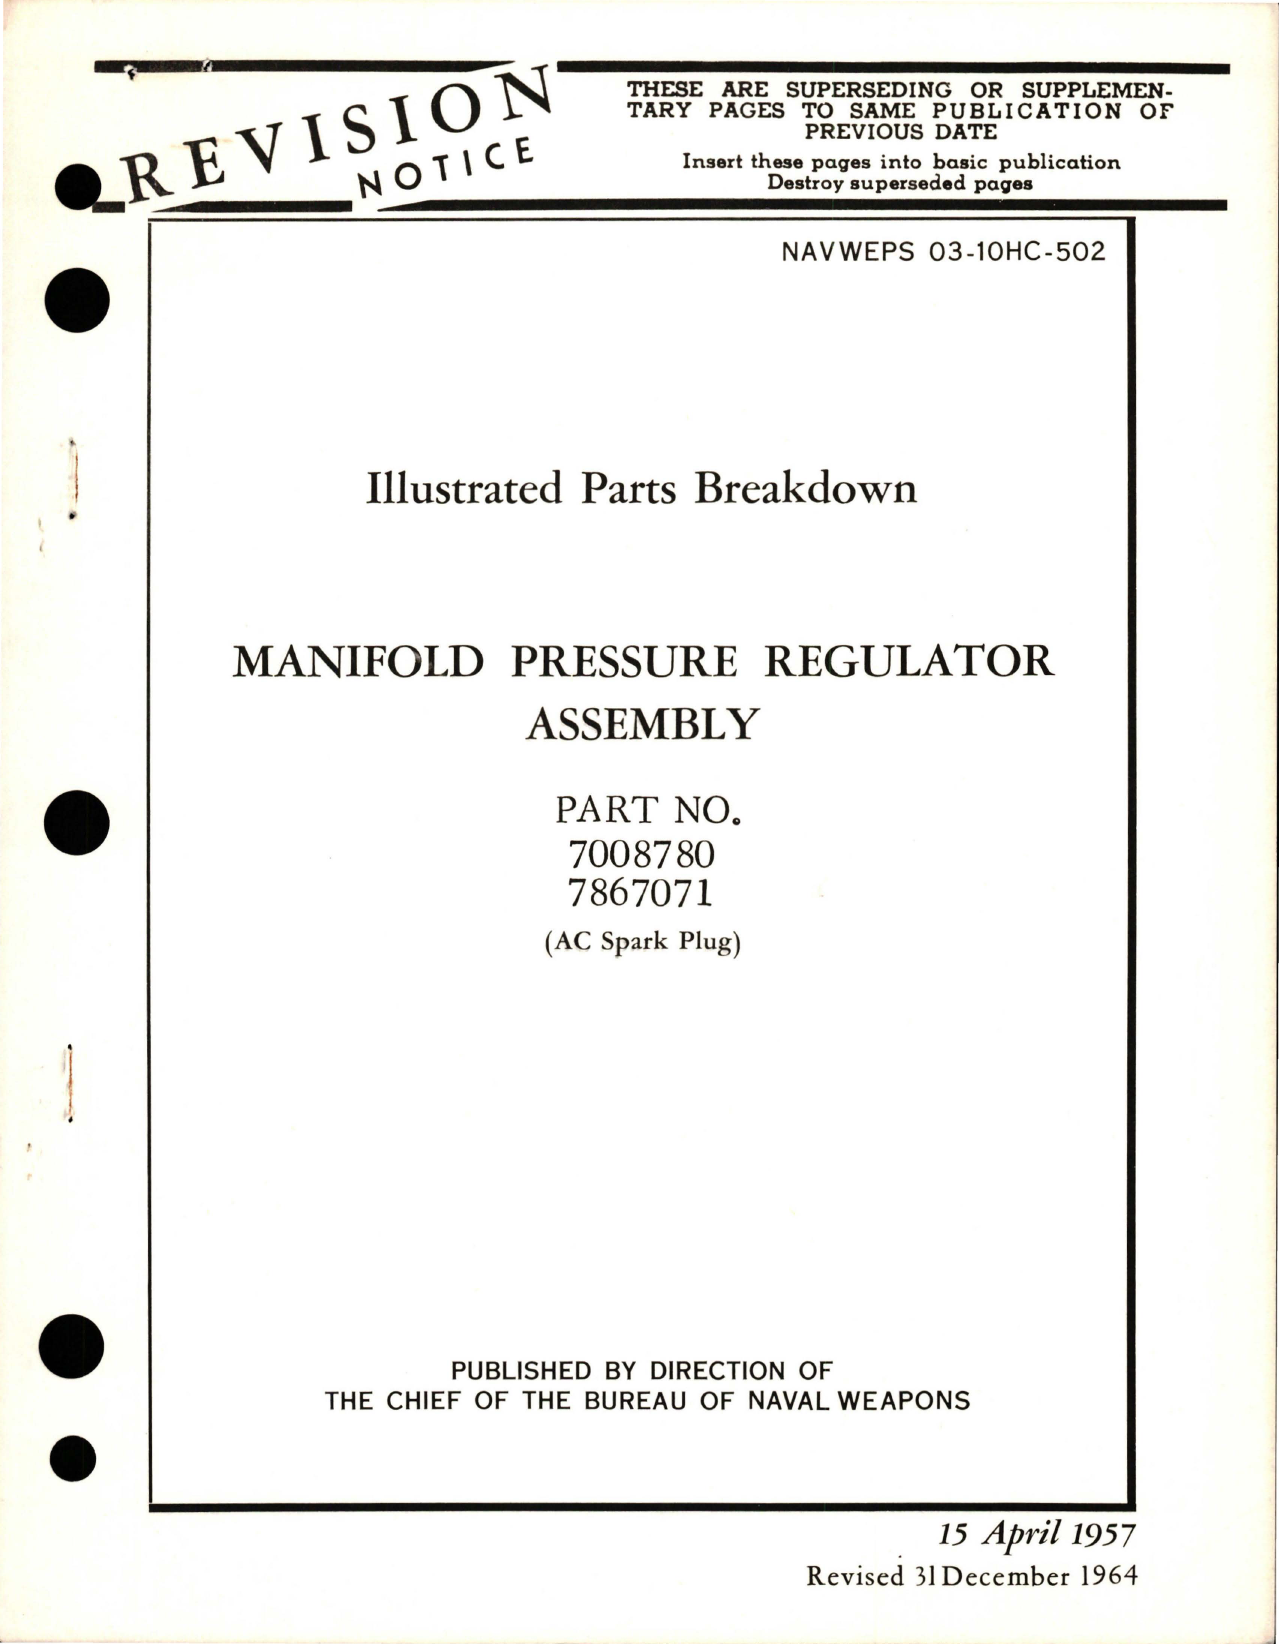 Sample page 1 from AirCorps Library document: Illustrated Parts Breakdown for Manifold Pressure Regulator Assembly - Parts 7008780 and 7867071